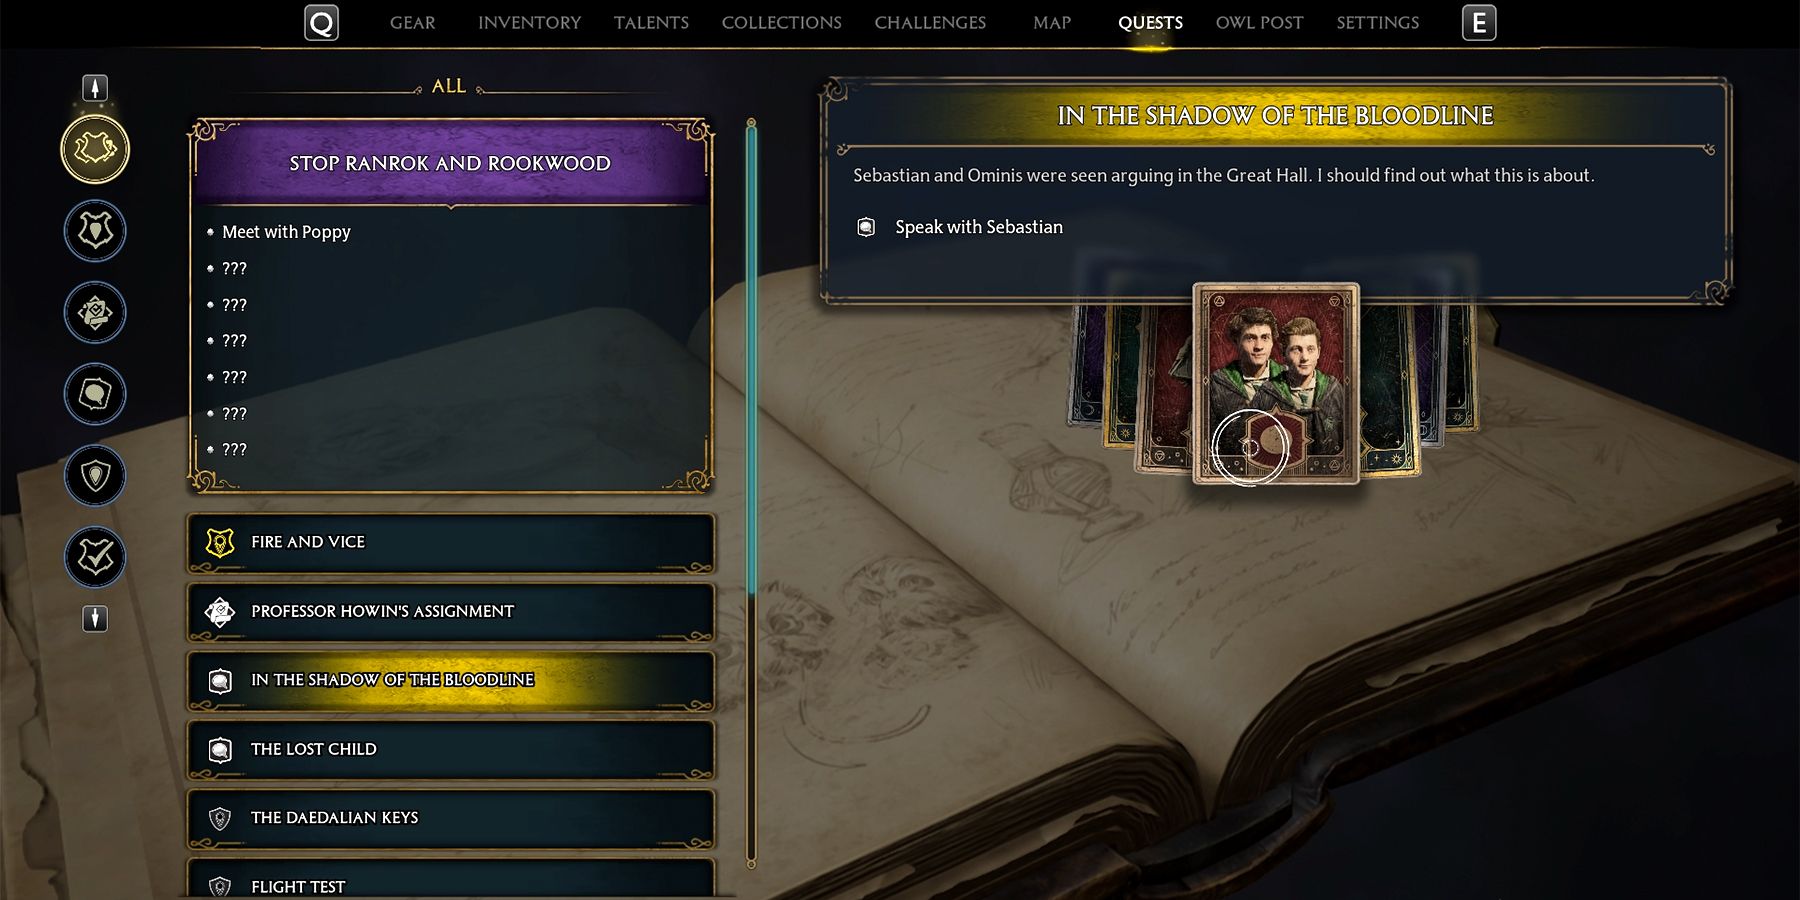 in the shadow of the bloodline quest in hogwarts legacy